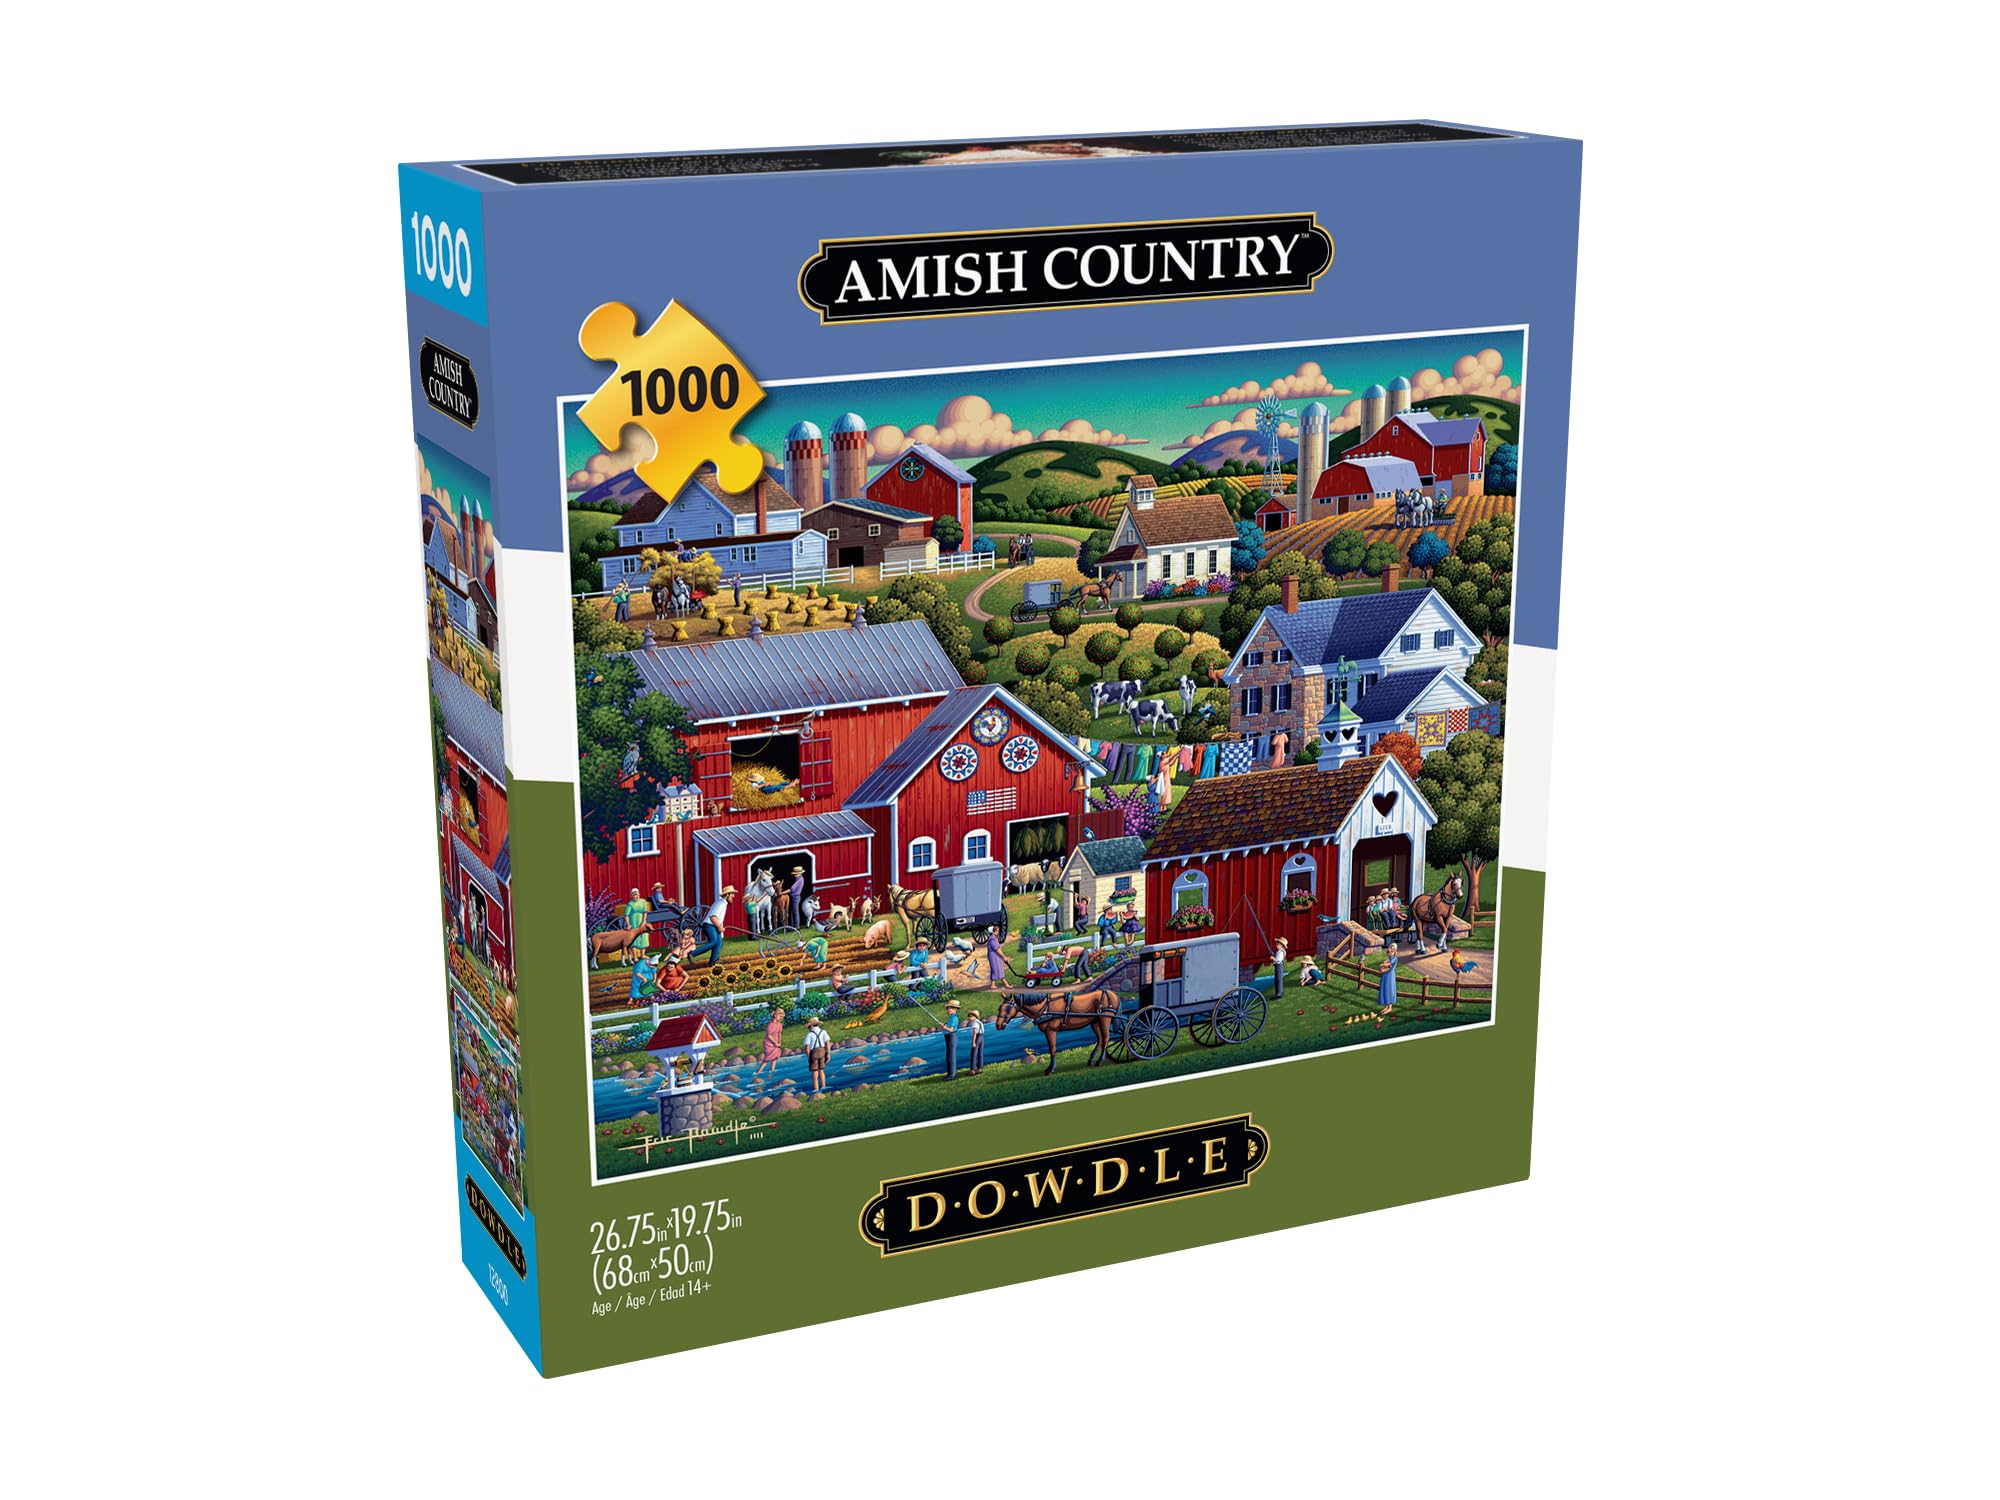 Buffalo Games - Dowdle - Amish Country - 1000 Piece Jigsaw Puzzle for Adults Challenging Puzzle Perfect for Game Nights - Finished Size 26.75 x 19.75